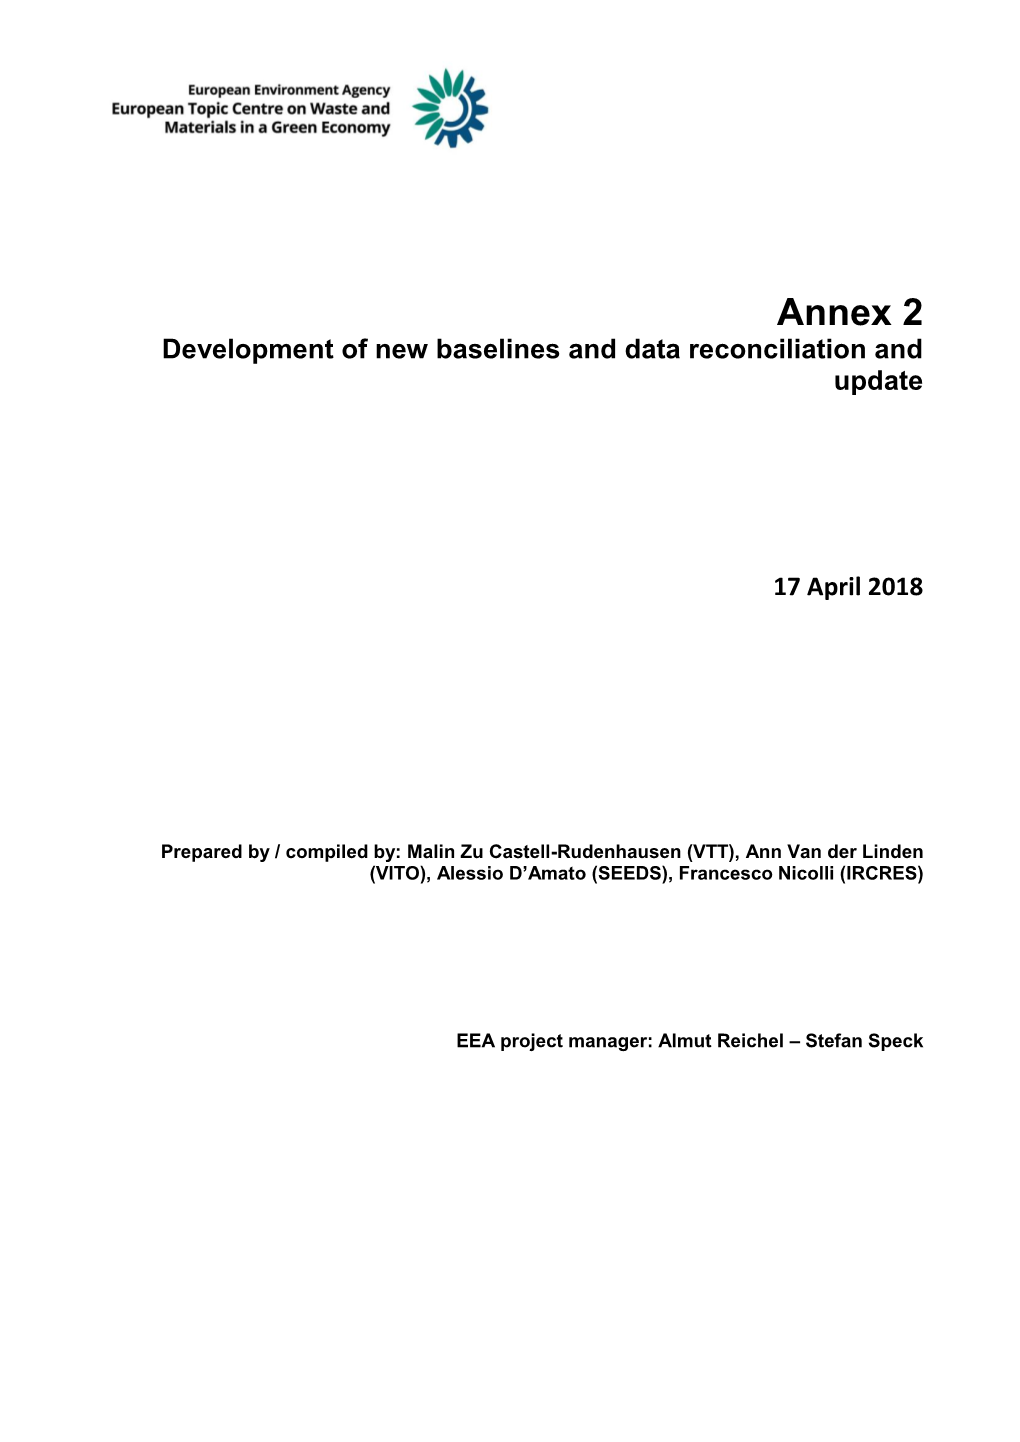 Annex 2 Development of New Baselines and Data Reconciliation and Update